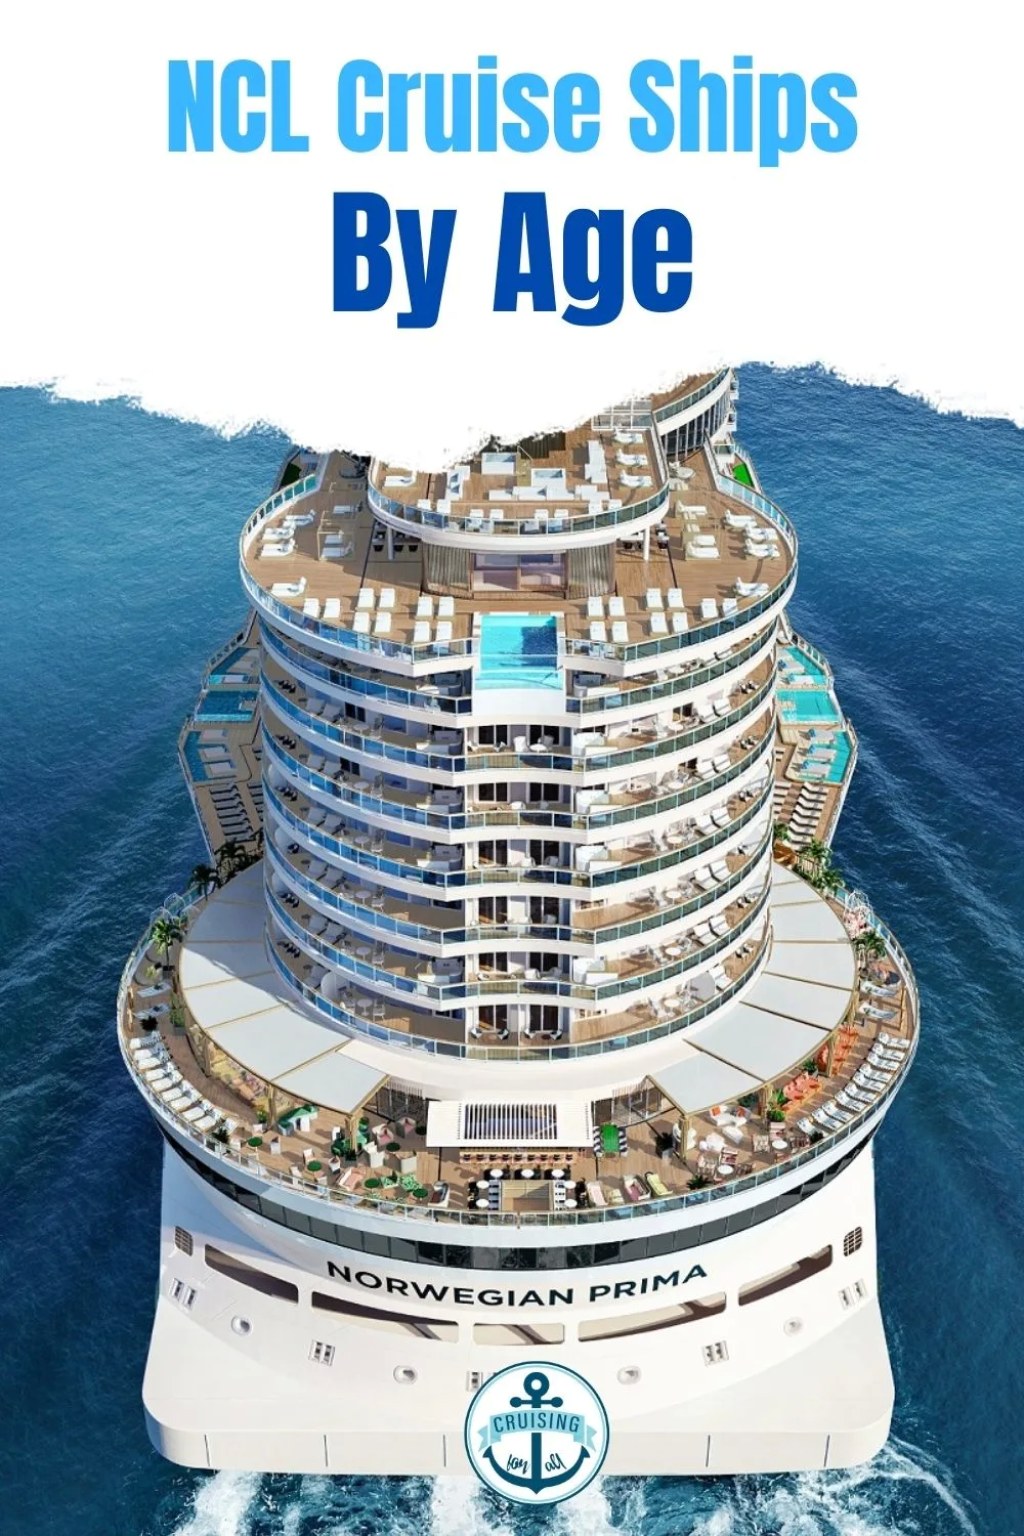 biggest ncl cruise ship - NCL Ships By Age and Size () - Cruising For All